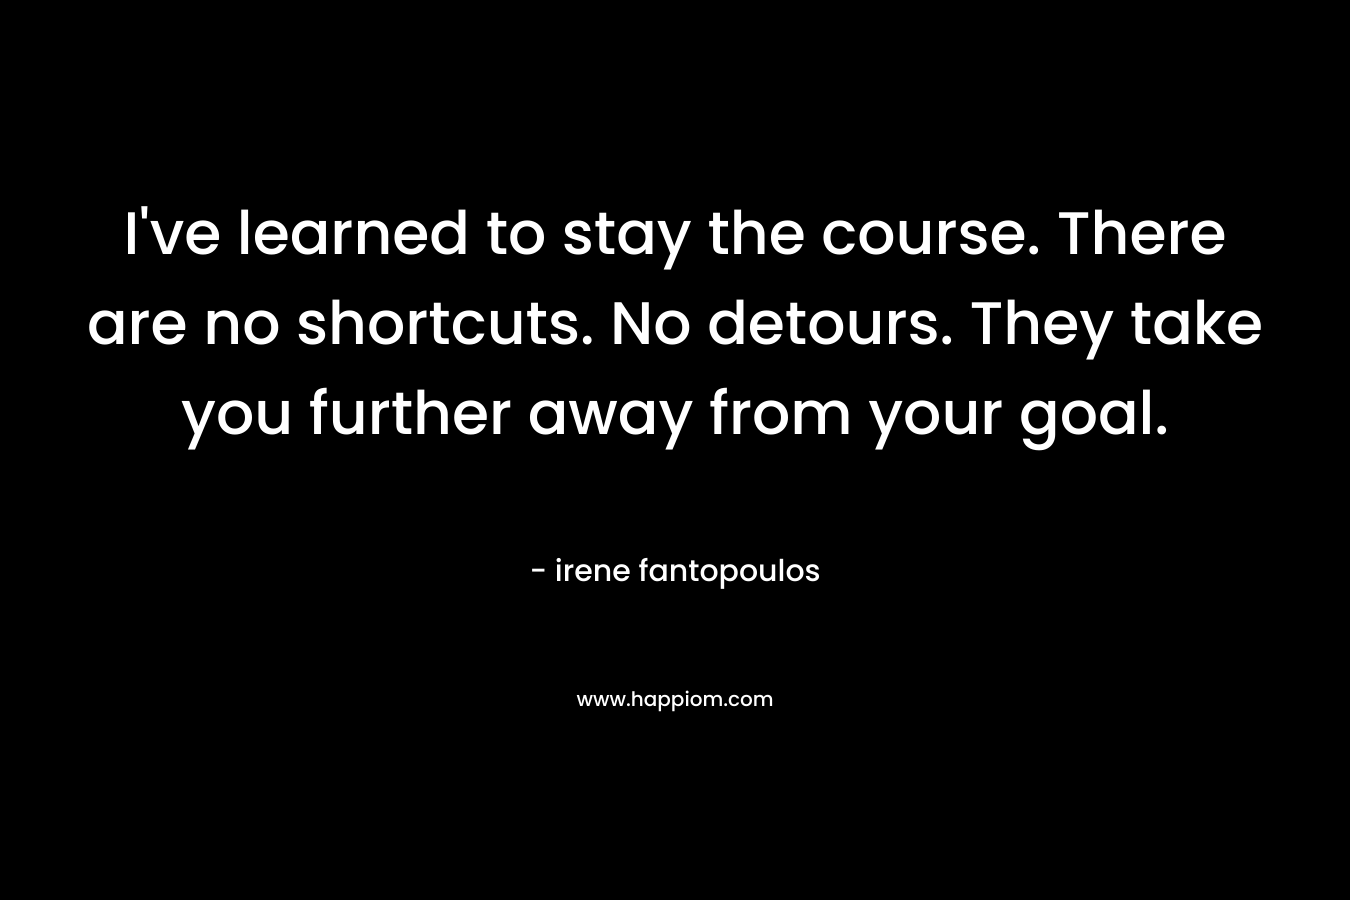 I've learned to stay the course. There are no shortcuts. No detours. They take you further away from your goal.